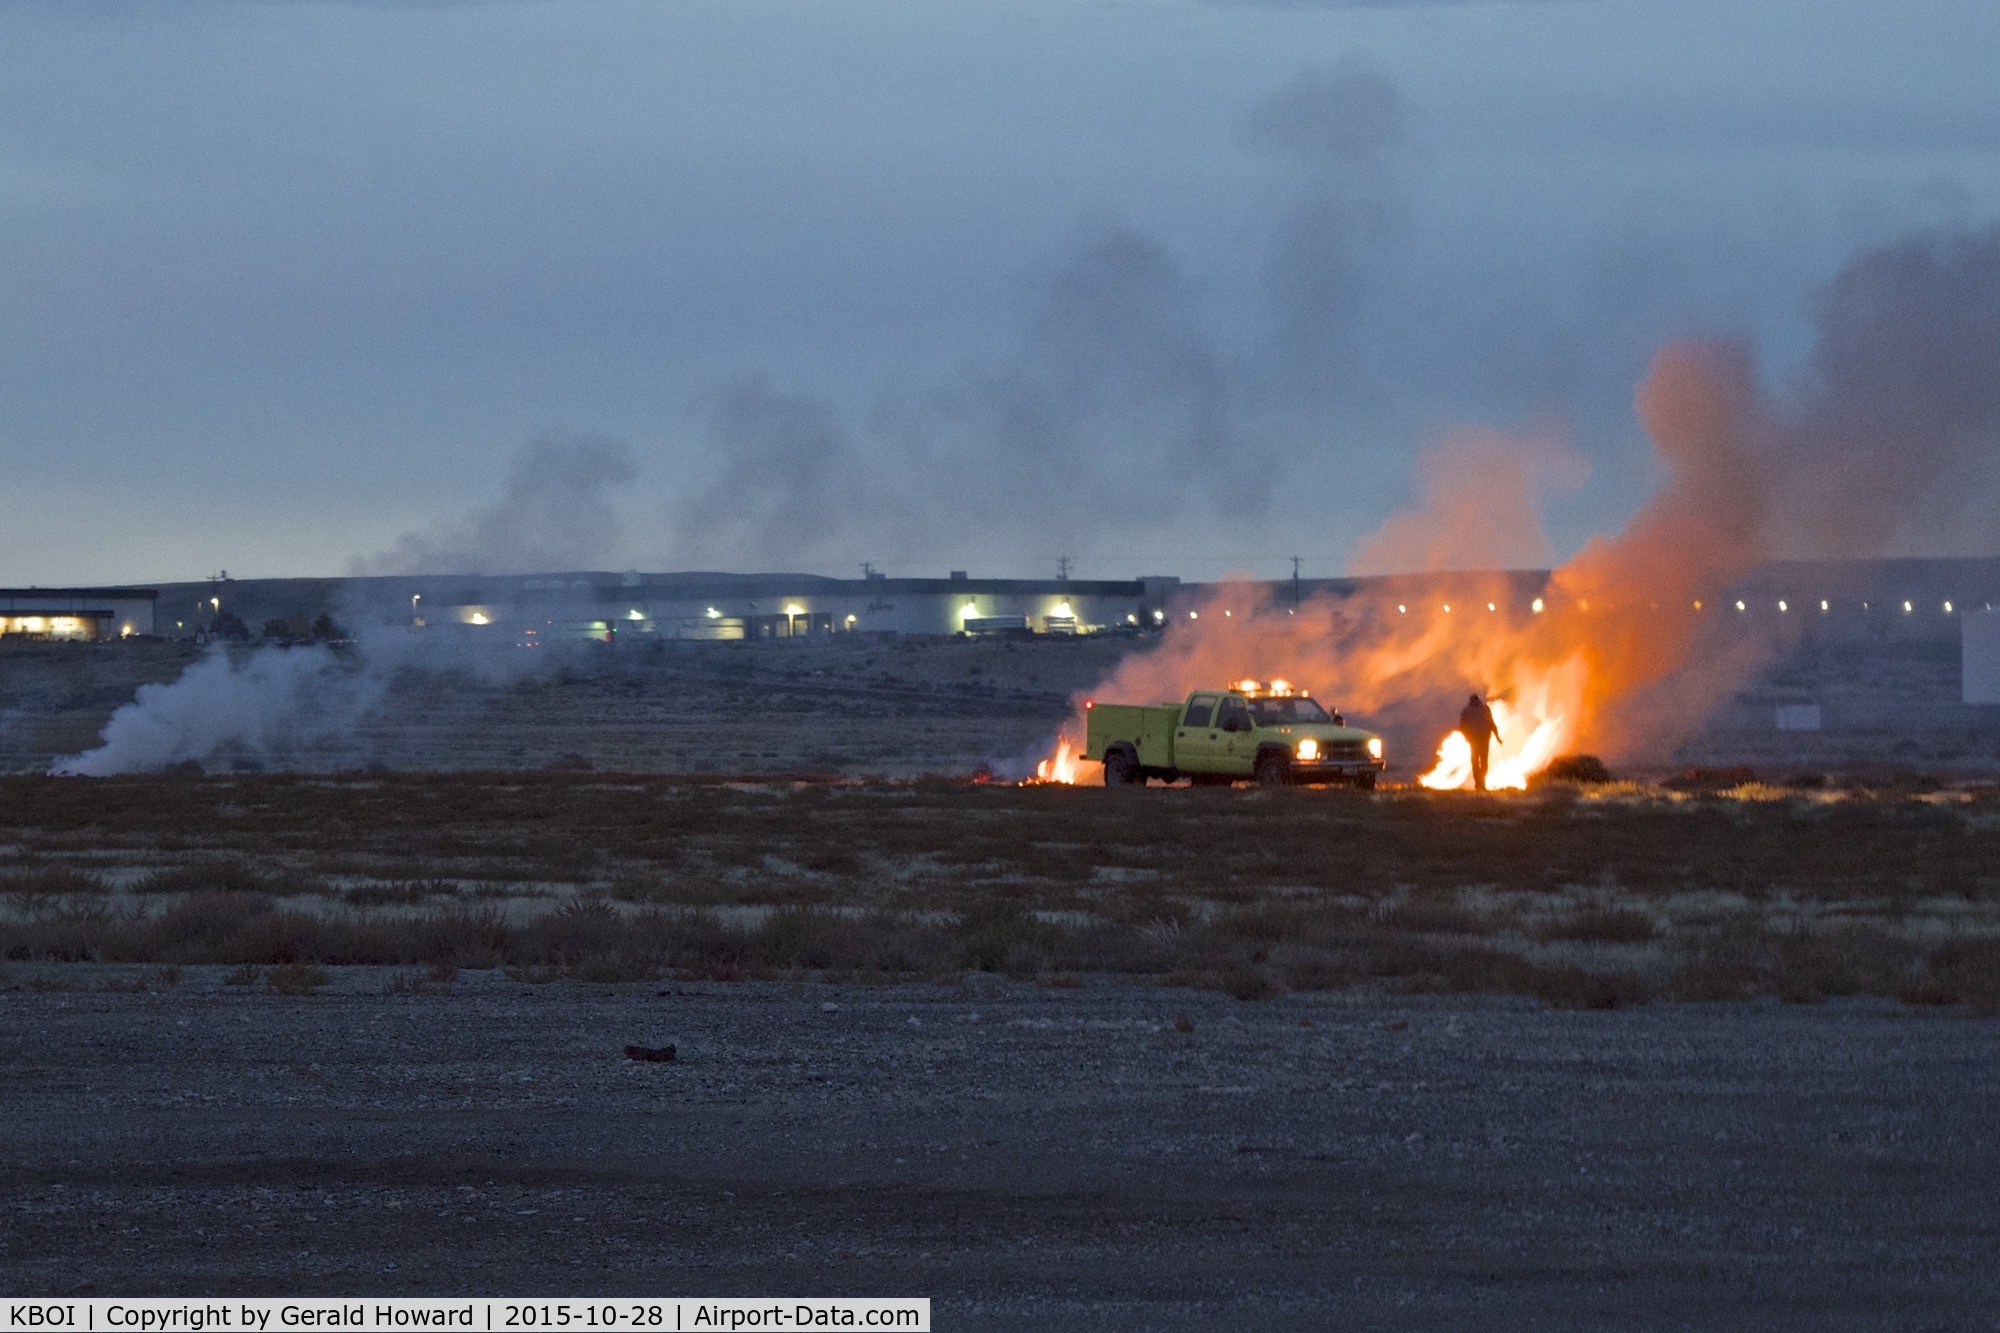 Boise Air Terminal/gowen Fld Airport (BOI) - Early morning burning of piles of tumbleweeds that collect on the airport. When the wind blows they become a FOD hazard.